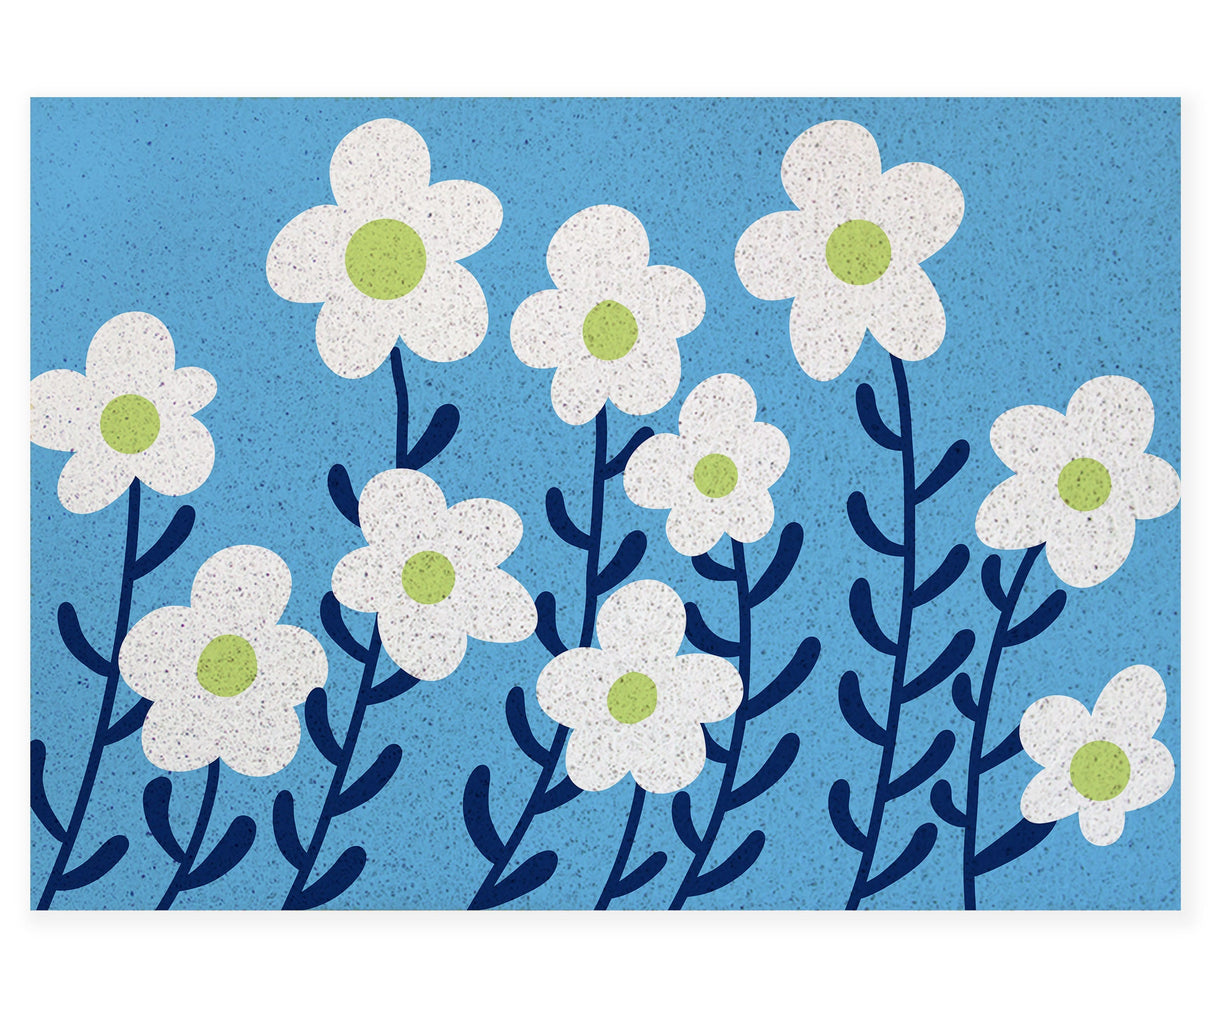 Feblilac White Flower and Blue Ground Door Mat, Country Style Flower Patio Welcome Doormat, Anti Skid PVC Coil Outdoor Mats, Front Mat for Home, Washable Entryway Doormat